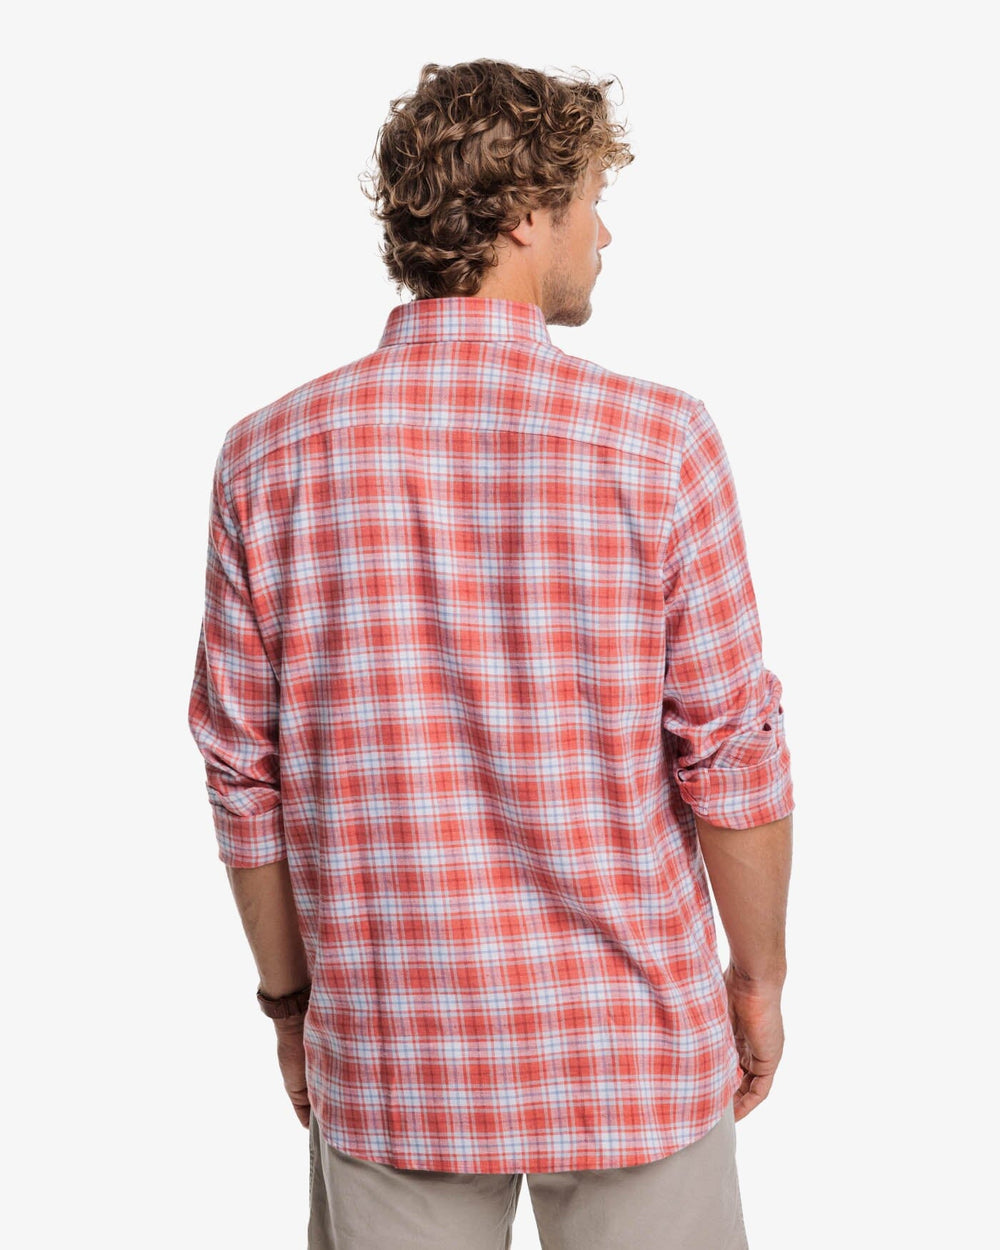 The back view of the Southern Tide Beach Flannel Heather Howland Plaid Sport Shirt by Southern Tide - Heather Dusty Coral